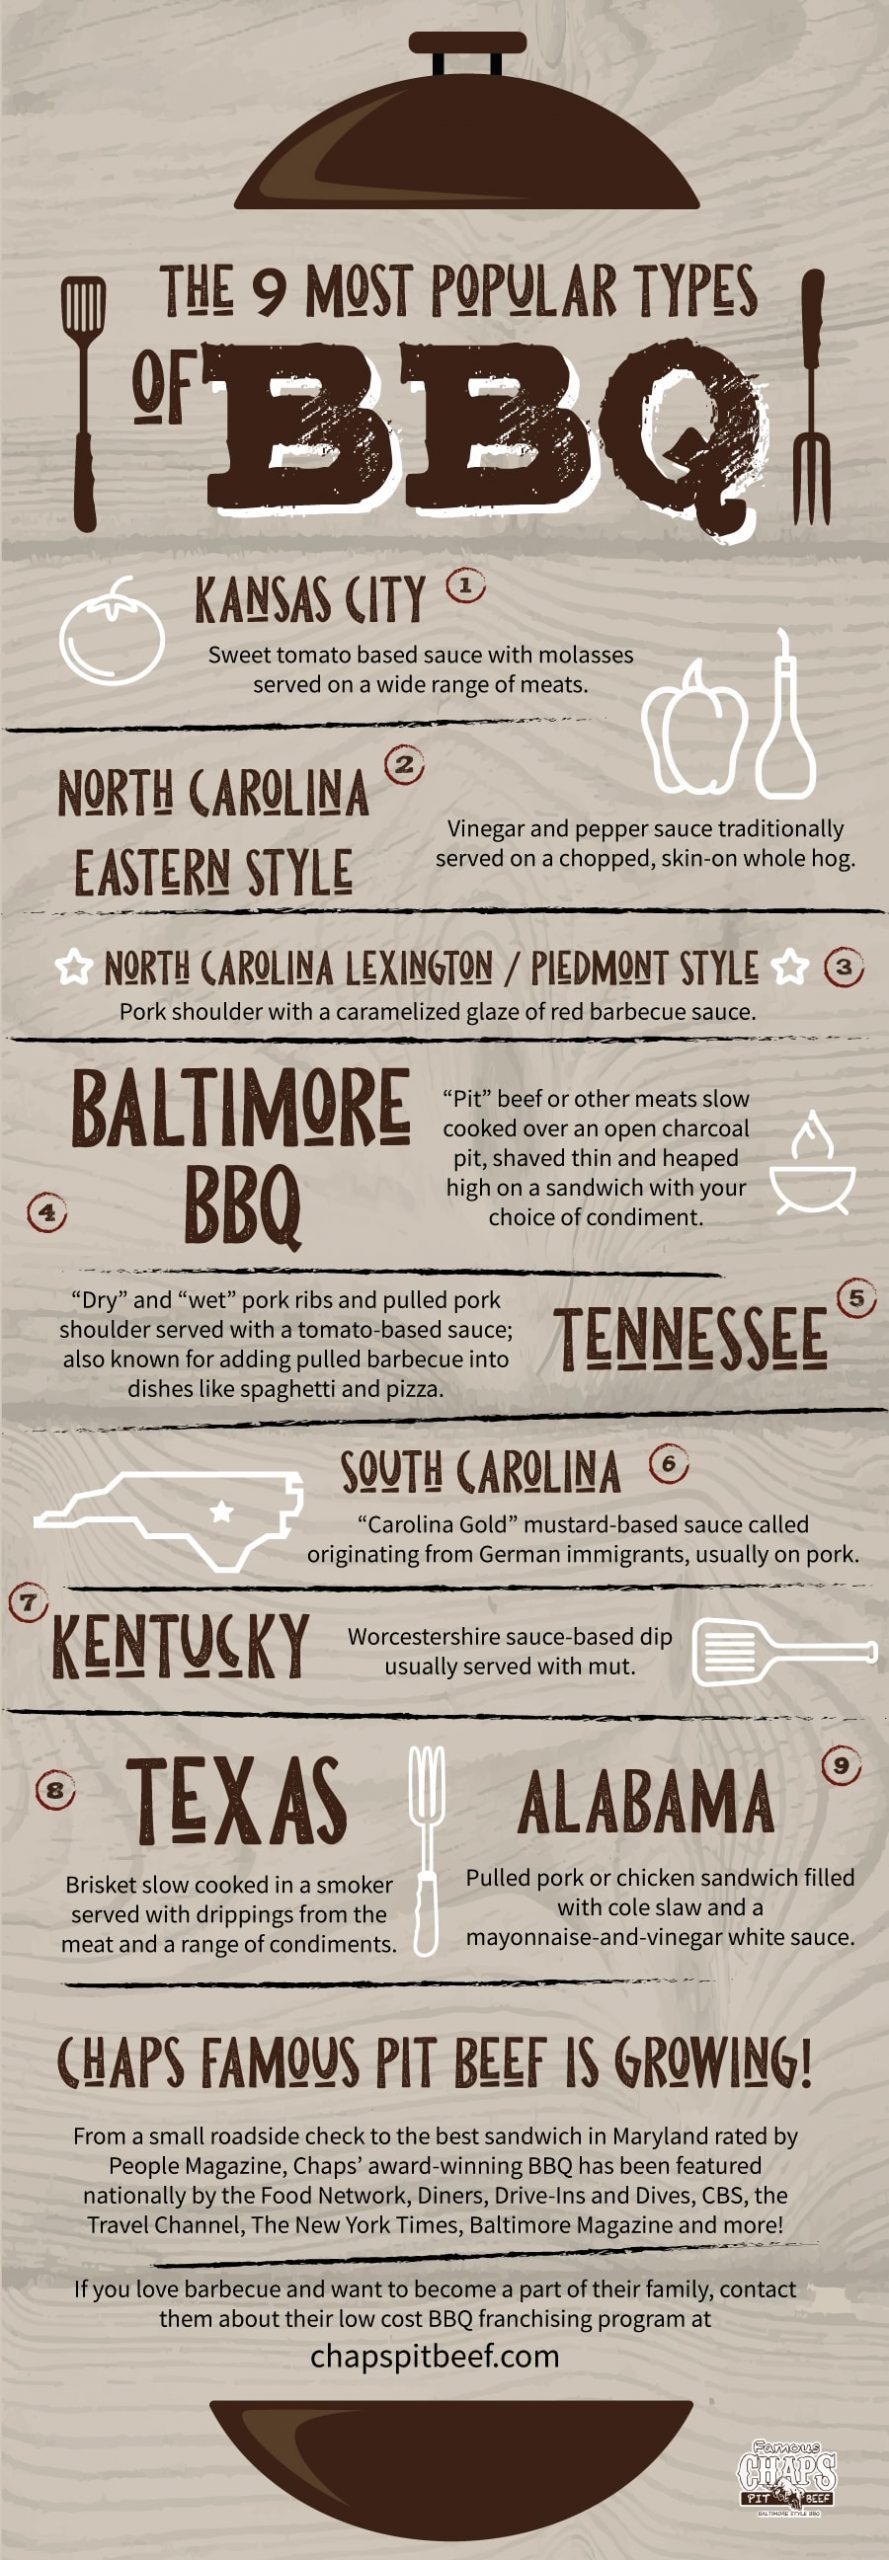 7 Most Popular BBQ Styles and How Baltimore BBQ Compares